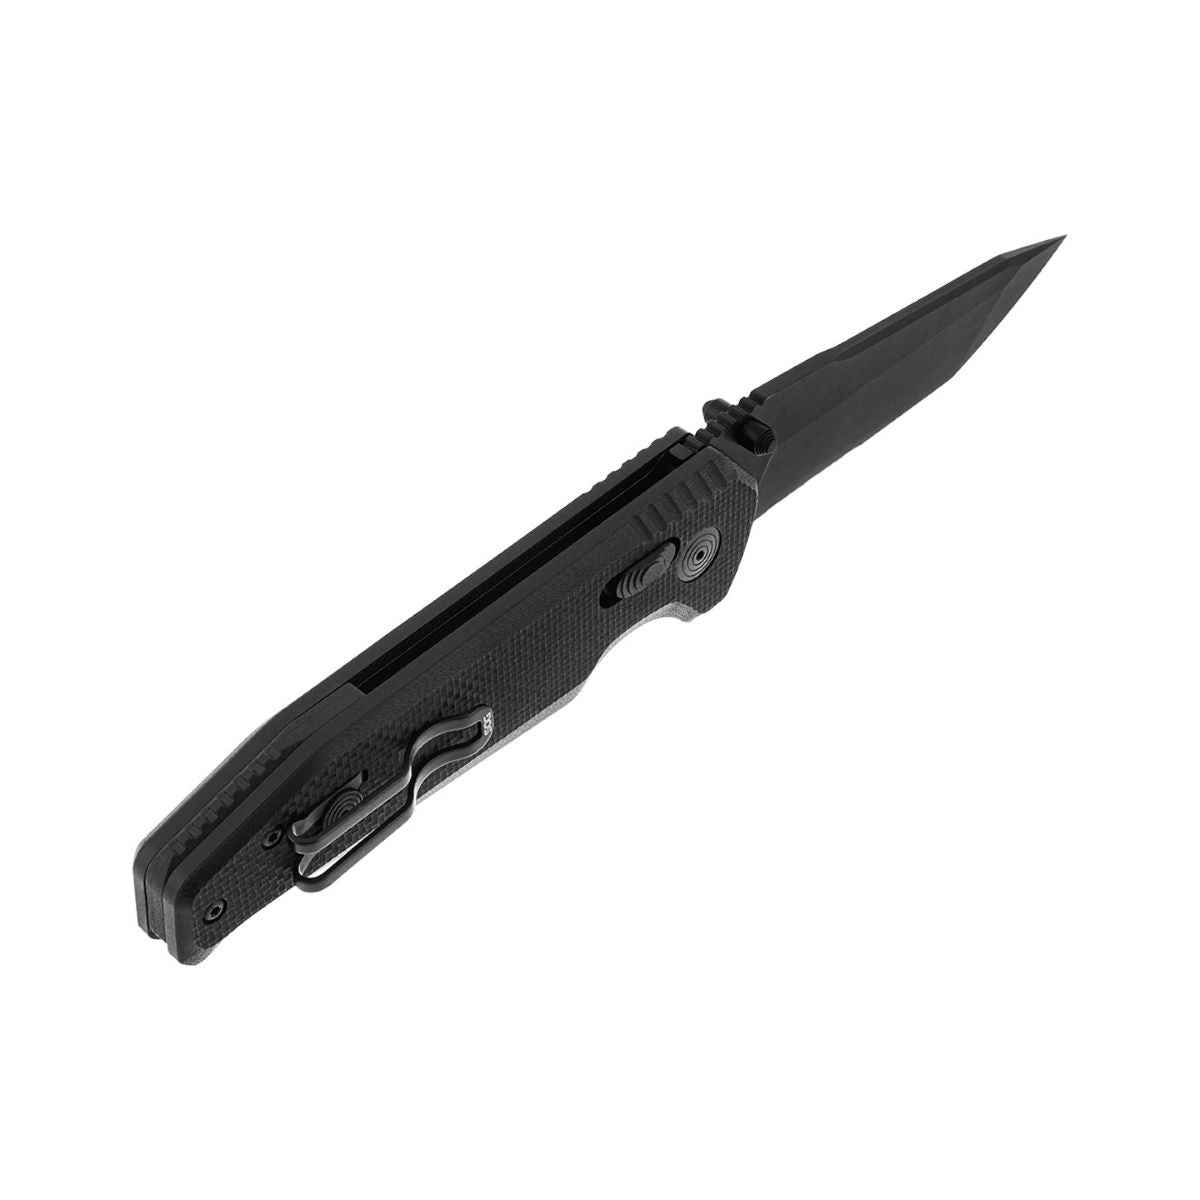 SOG Vision XR Serrated 3.36" Tanto Combo Blade Knife - 12-57-02-57 - Outdoor Travel Gear 3